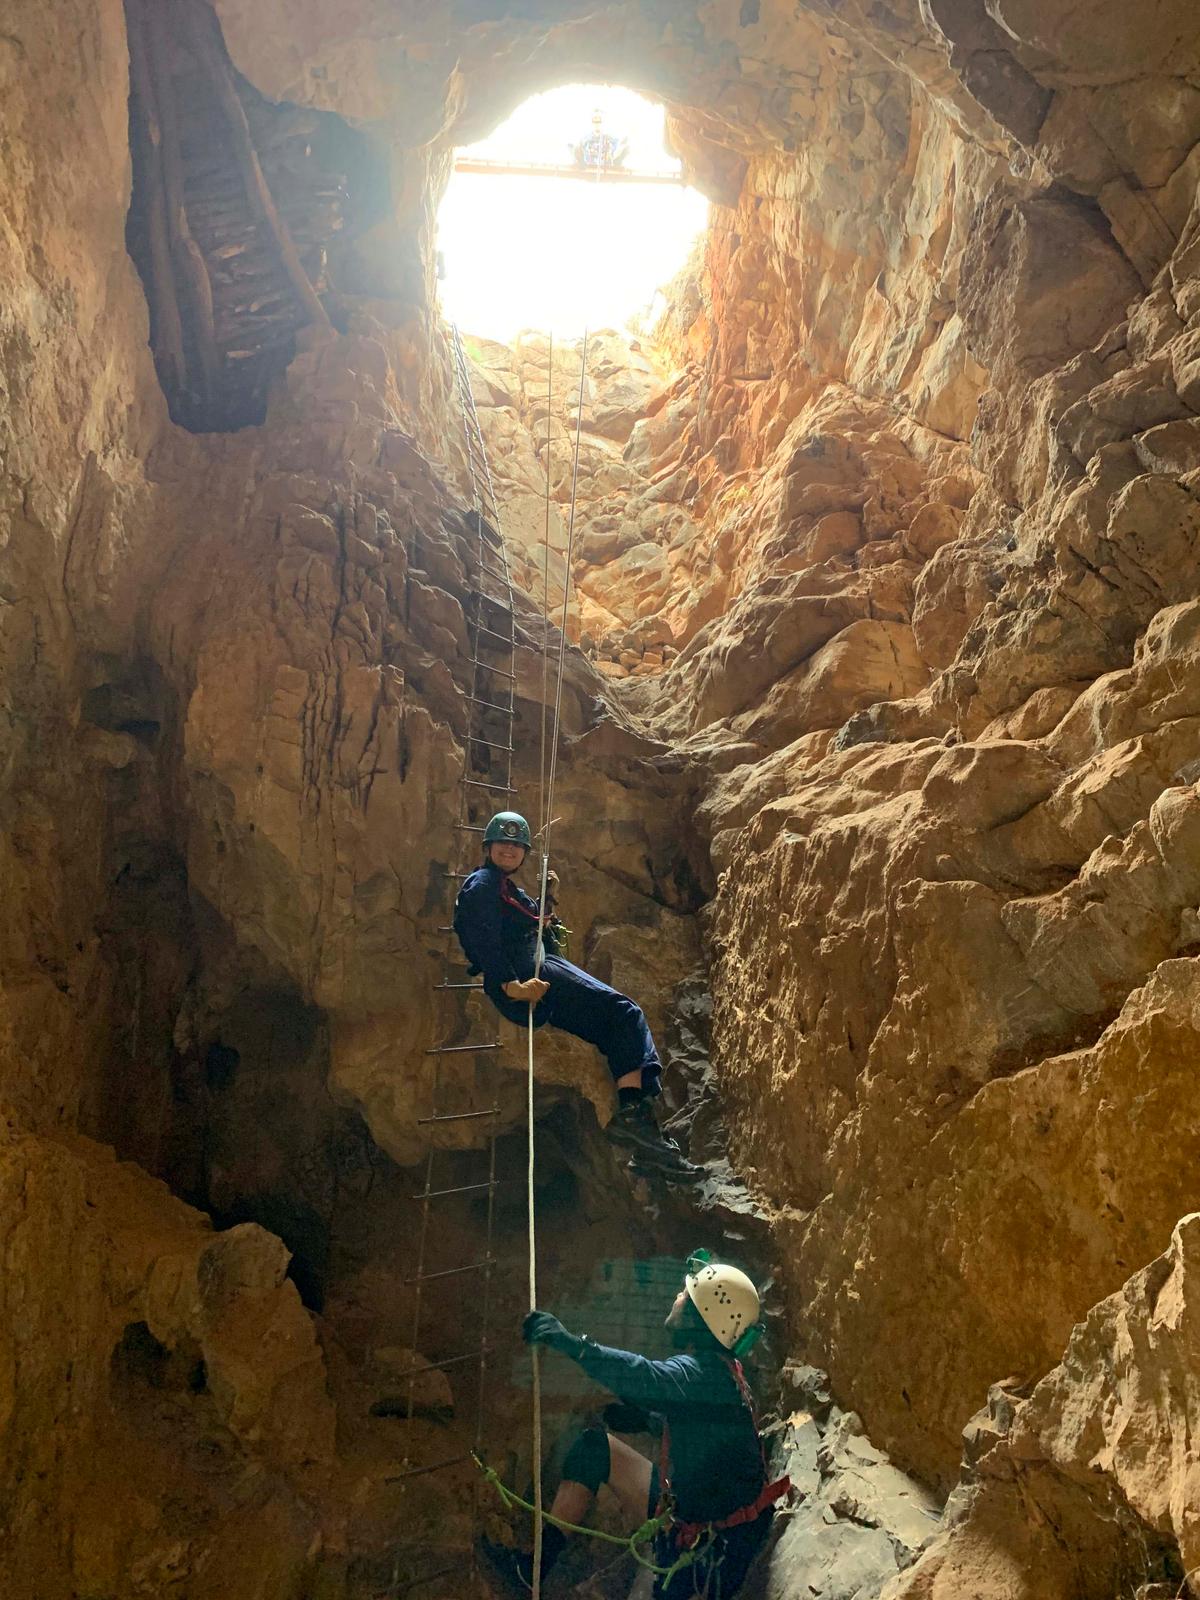 Researchers from Flinders University descend into a cave located in South Australia's Flinders Range. (Courtesy of Aaron Camens)